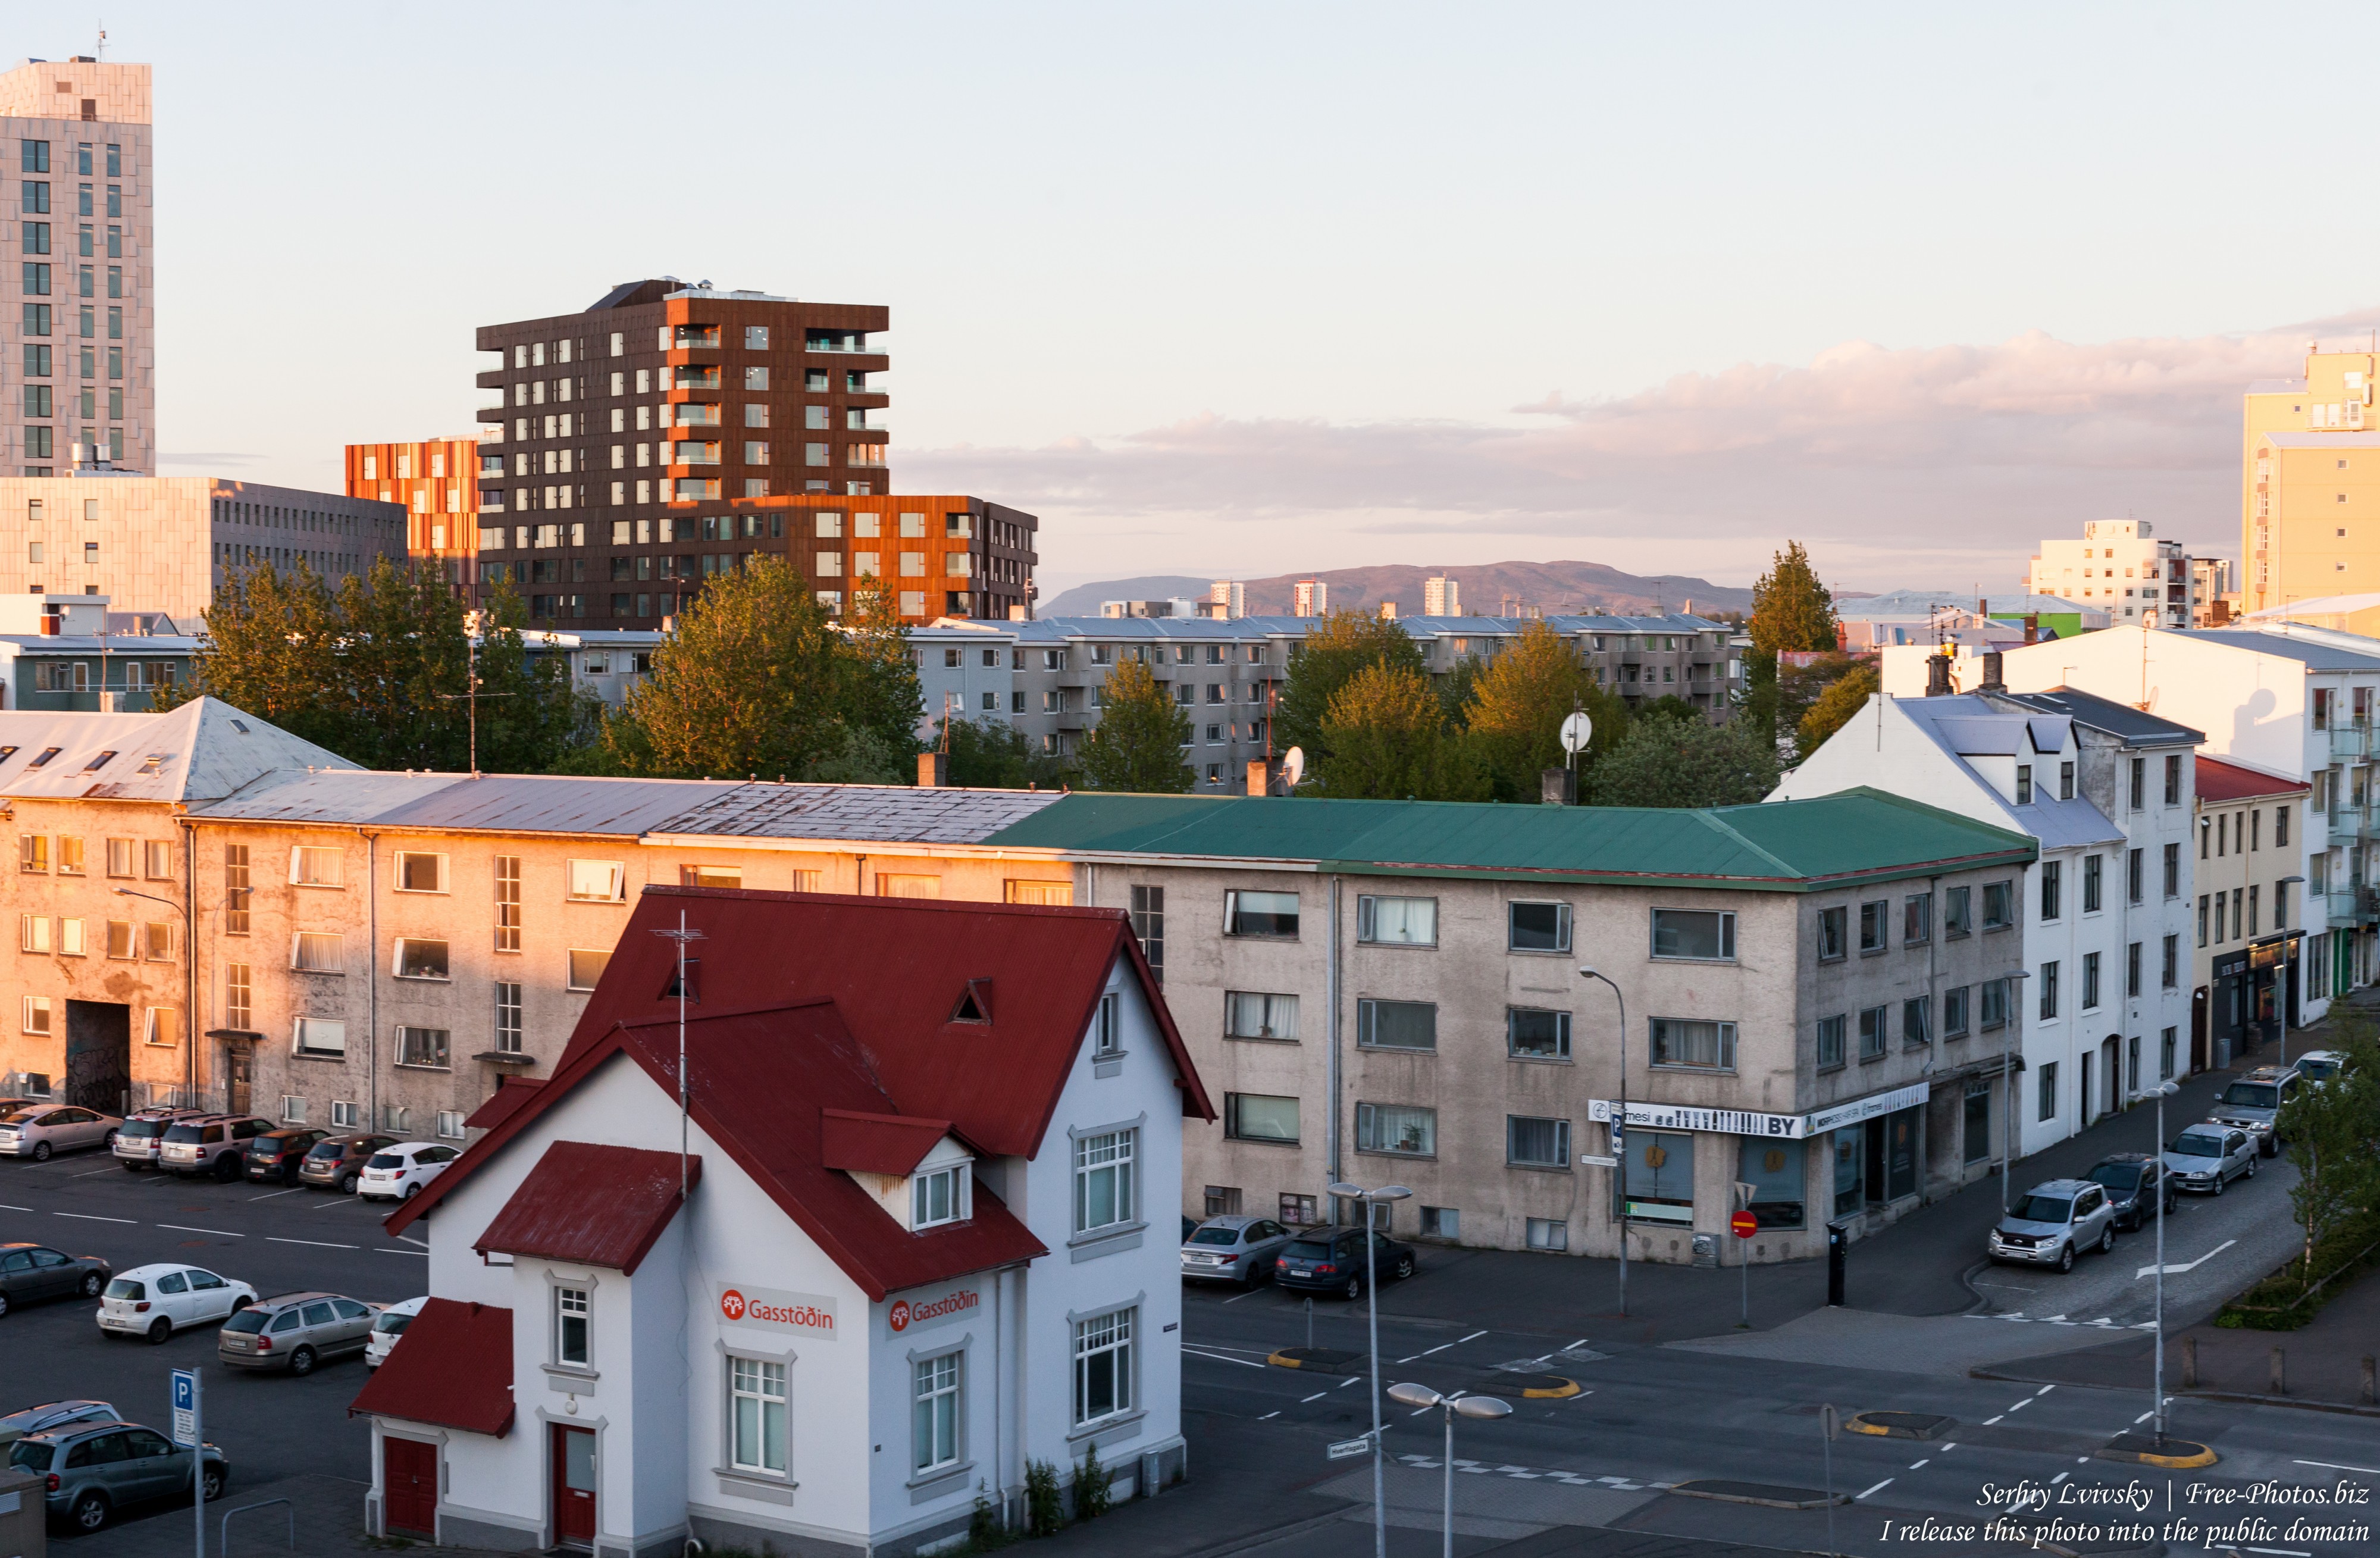 Reykjavik, Iceland, photographed in May 2019 by Serhiy Lvivsky, picture 3